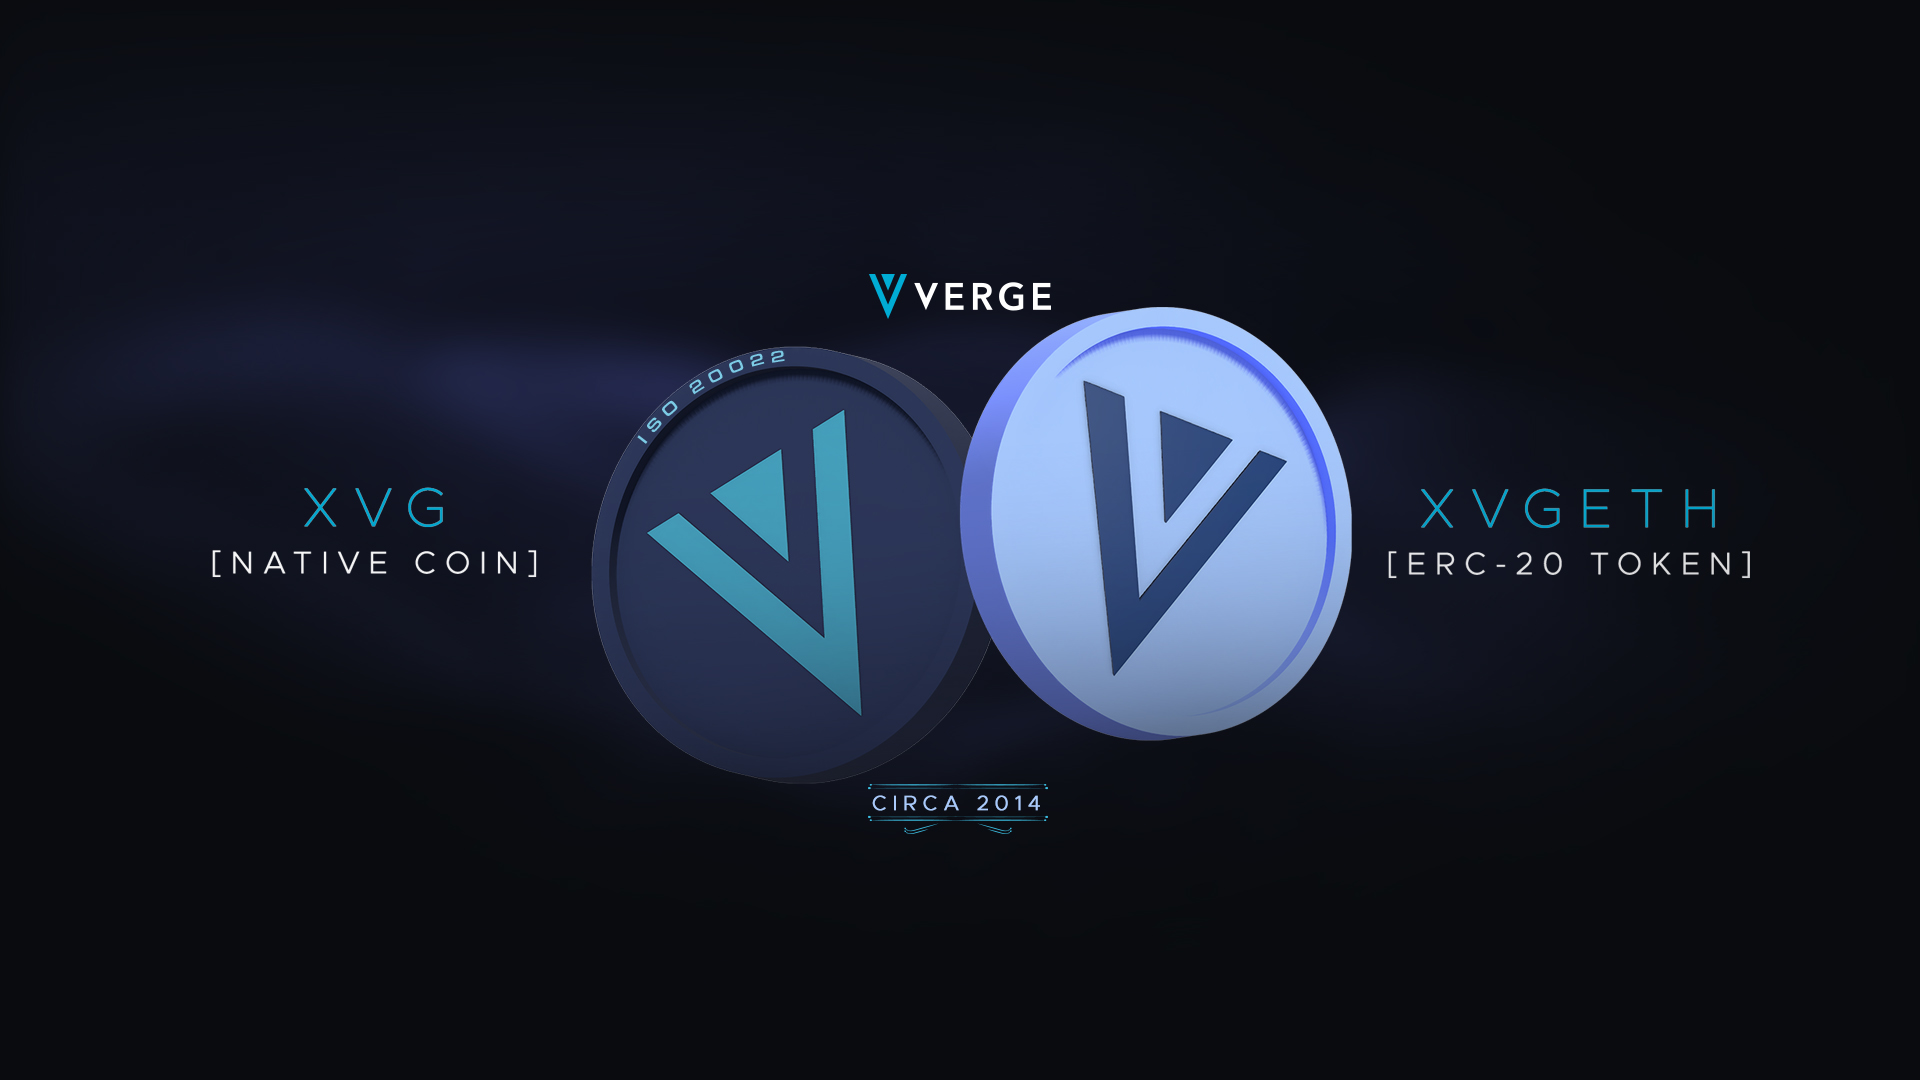 Verge Wallet Guide - Find Your Best XVG Wallet Choice!